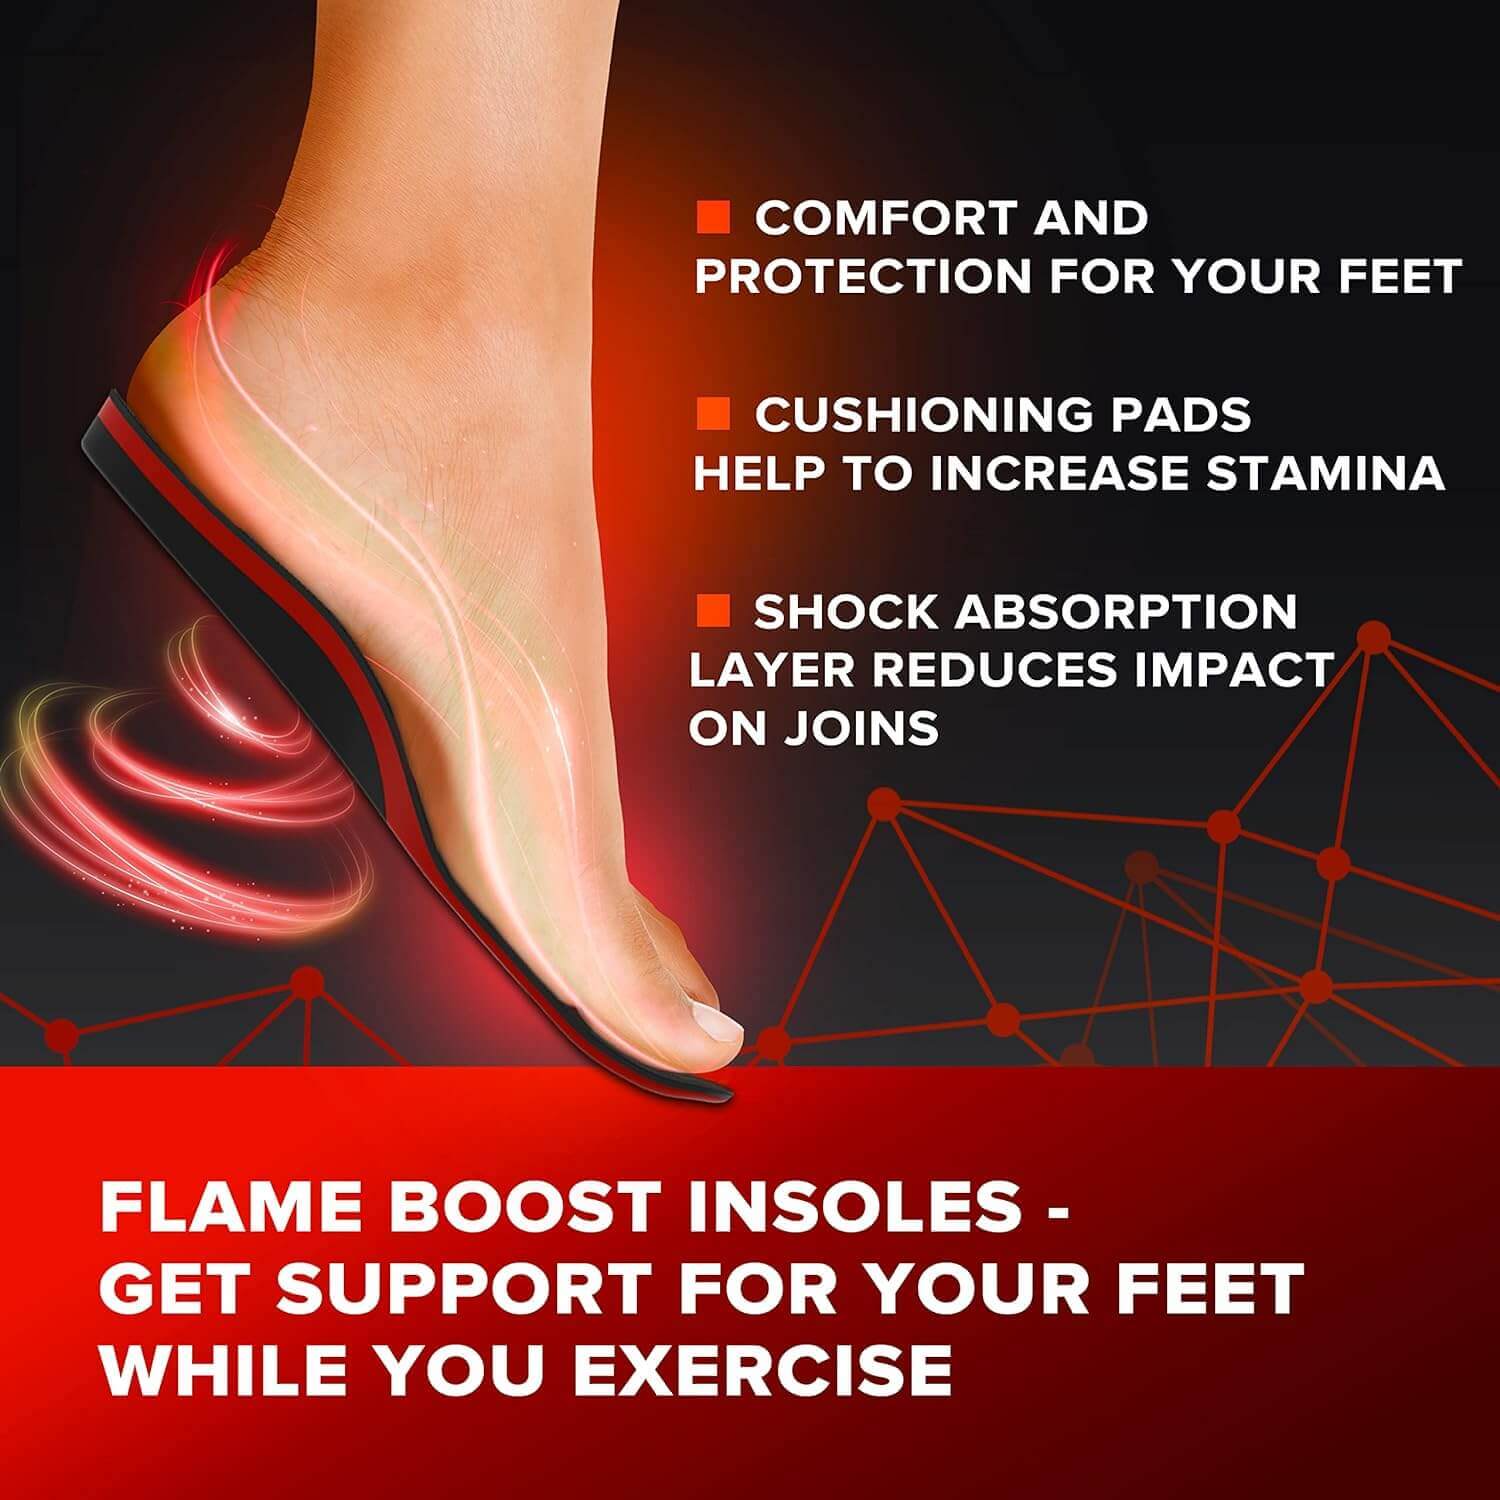 Shop The Latest >Sport Athletic Shoe Insoles Men Women - Ideal for Active Sports > *Only $53.99*> From The Top Brand > *Easyfeetl* > Shop Now and Get Free Shipping On Orders Over $45.00 >*Shop Earth Foot*